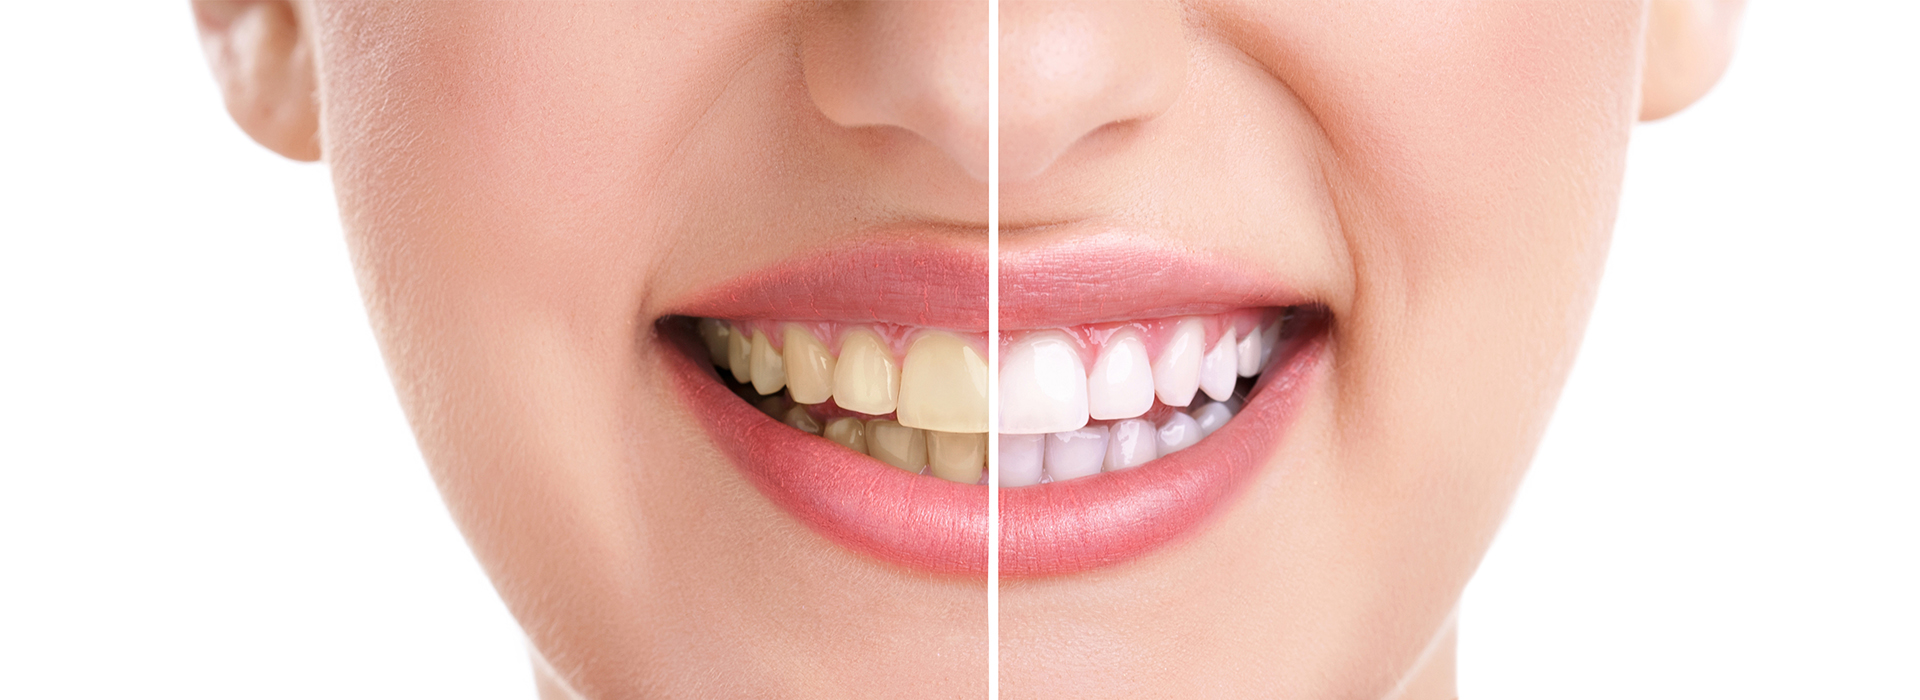 All About Smiles | Dental Fillings, Invisalign reg  and Extractions